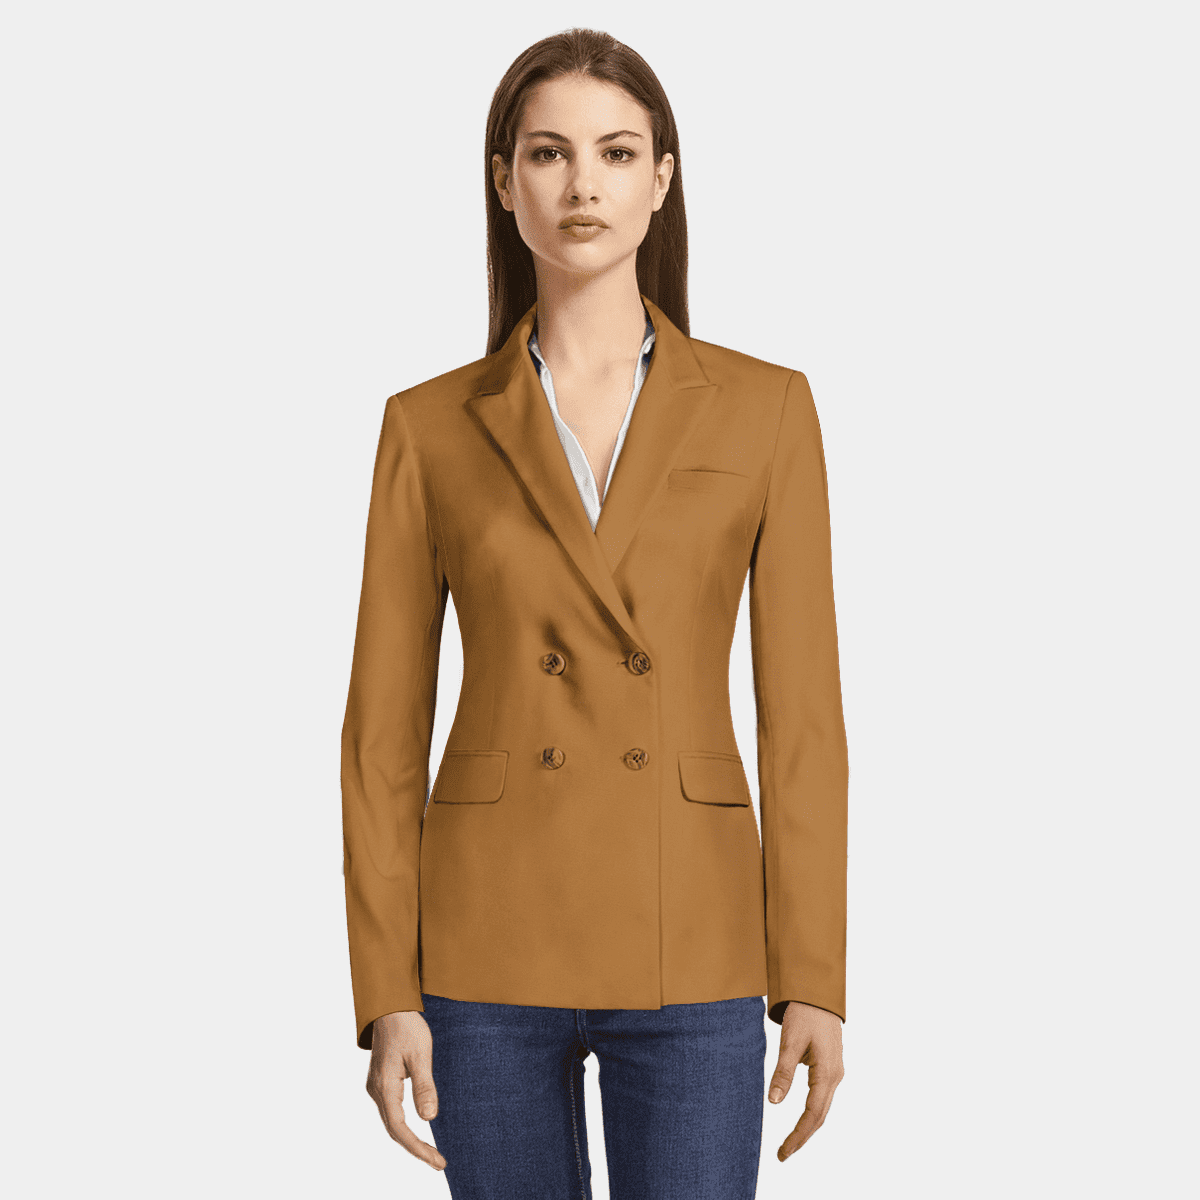 Women´s Double-Breasted Blazer, Explore our New Arrivals